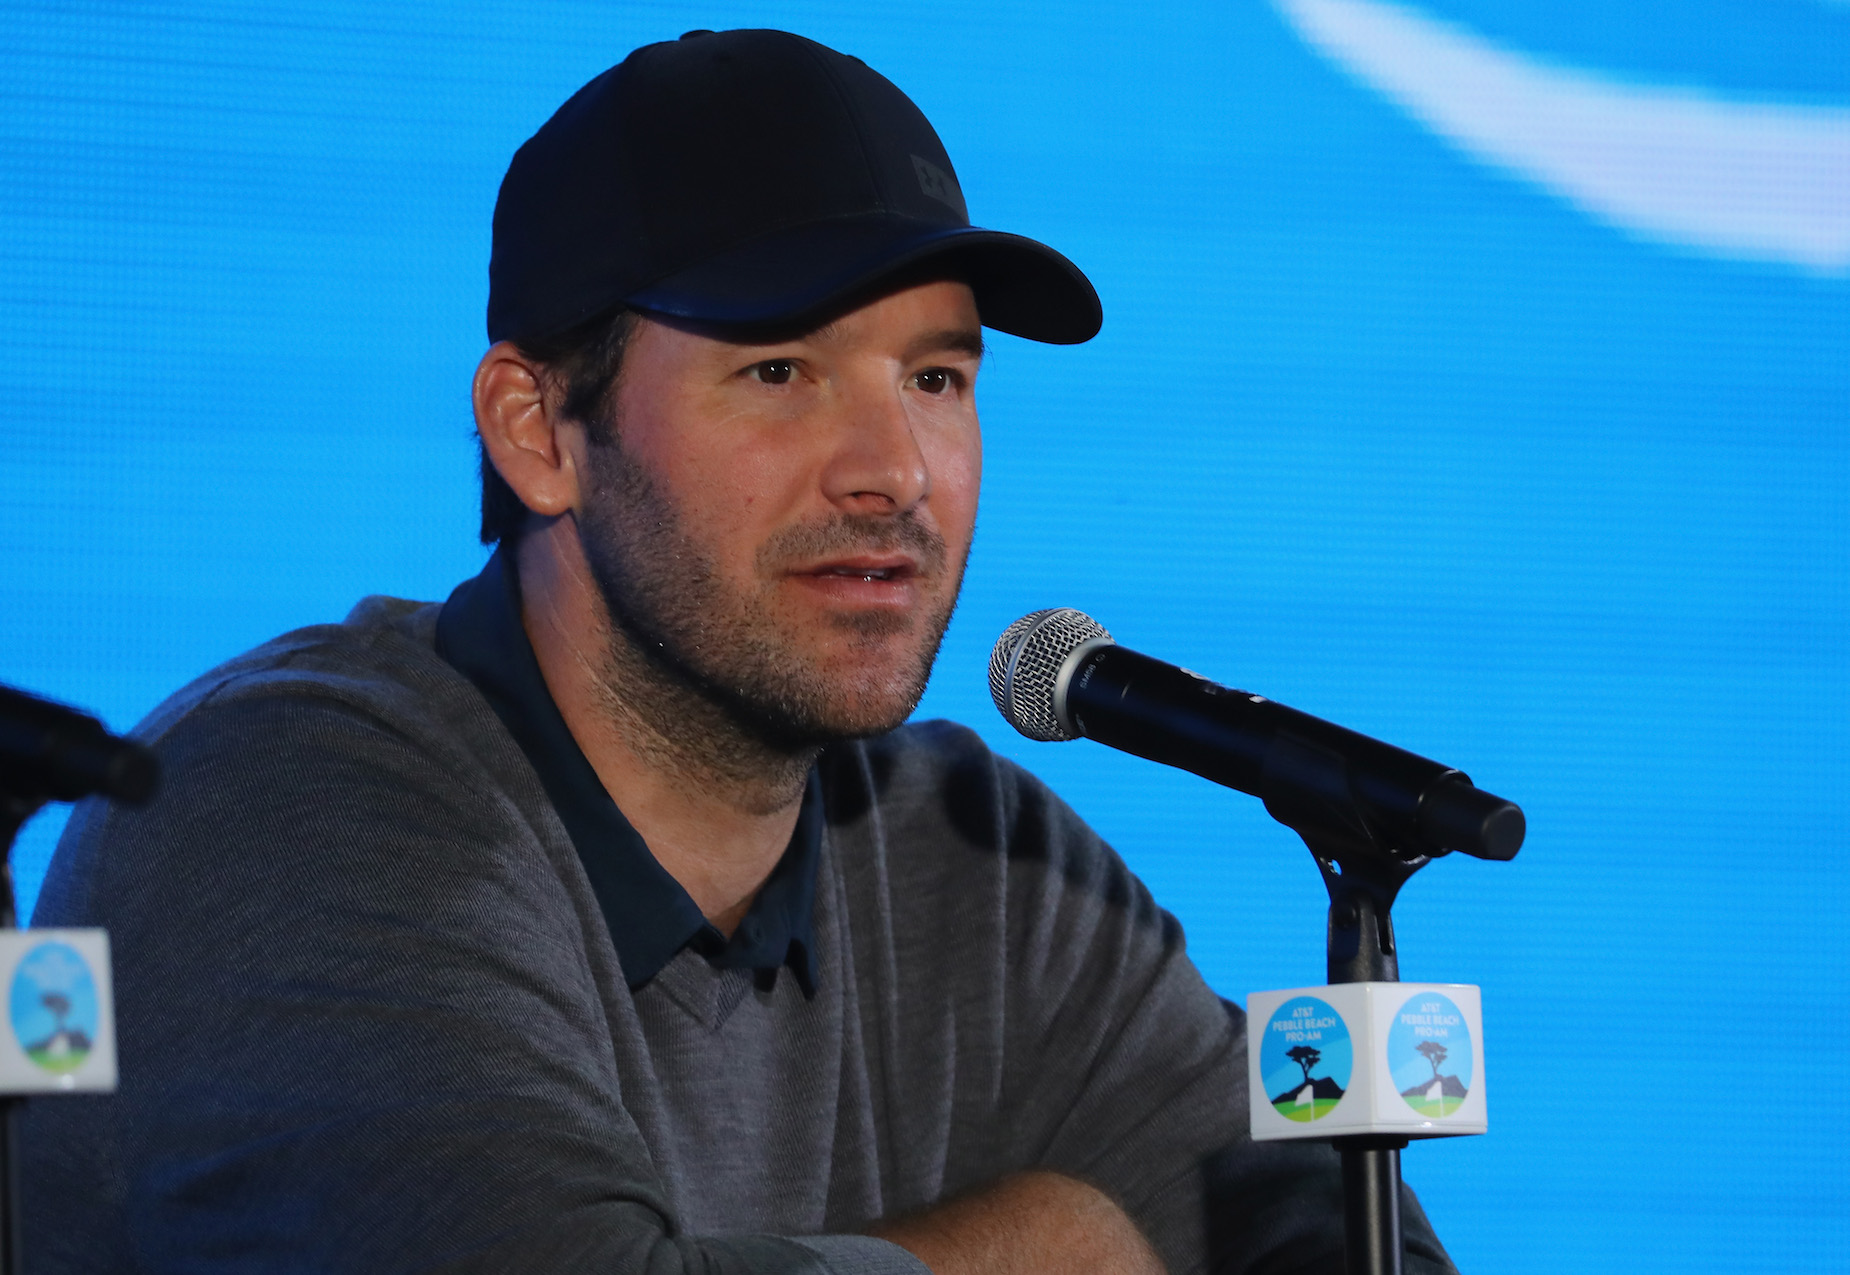 Despite what the commercials would lead you to believe, Tony Romo doesn't know much about fantasy football.